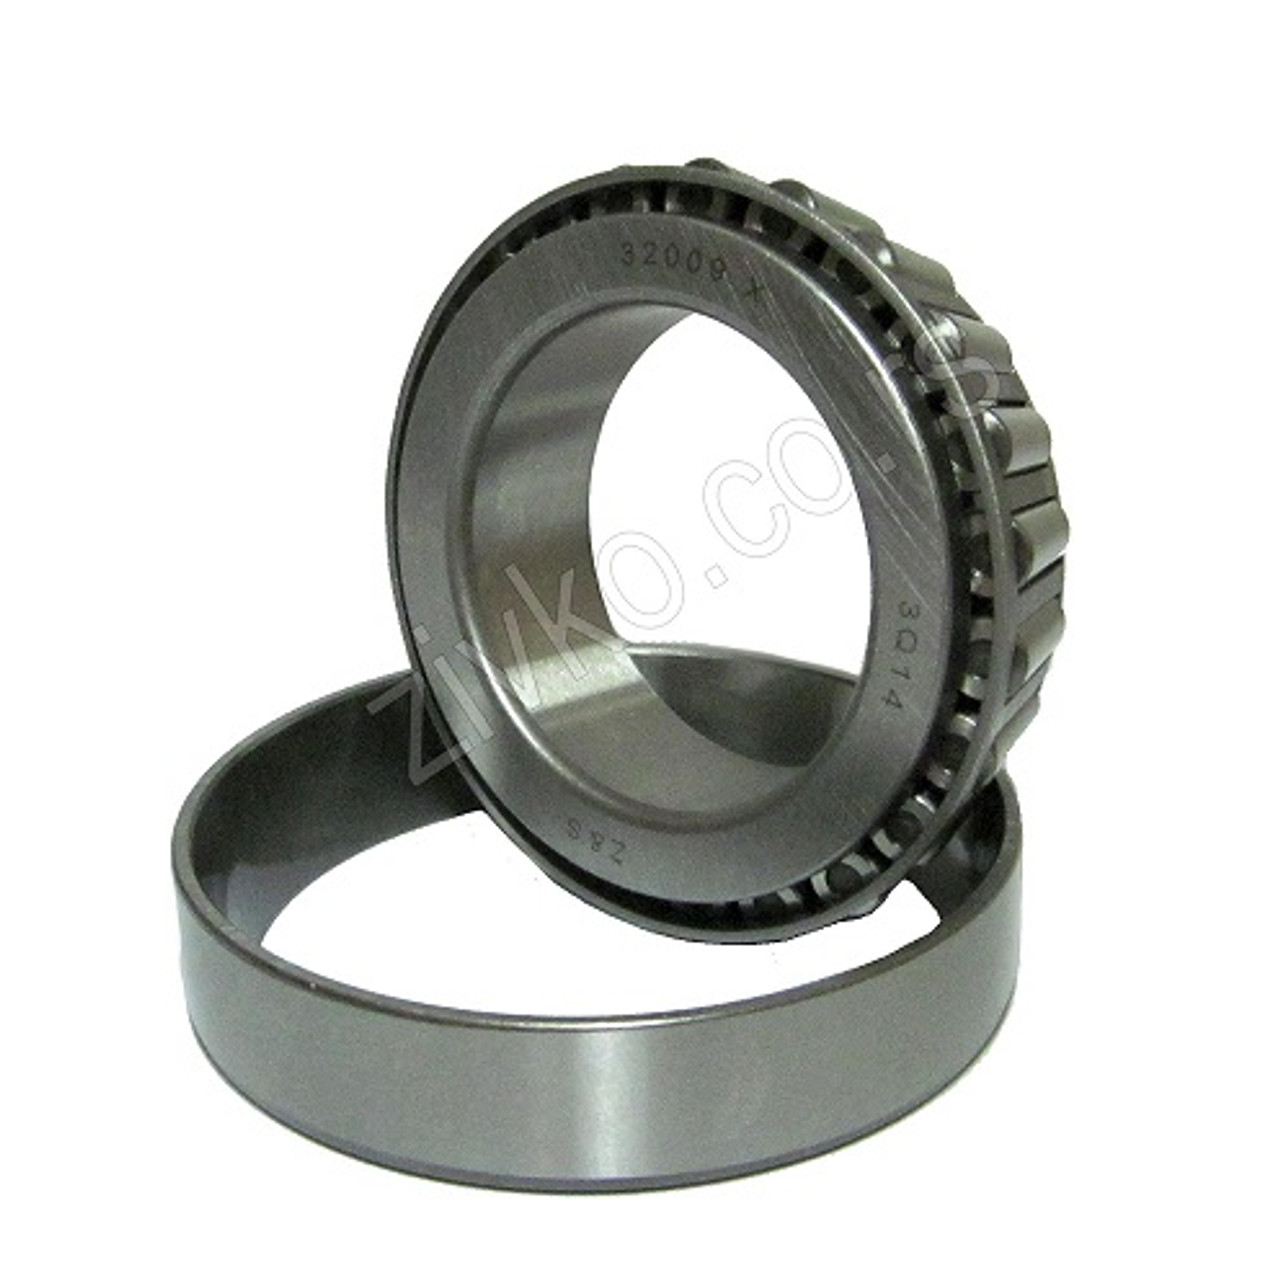 Tapered roller bearing 32009 X - 5